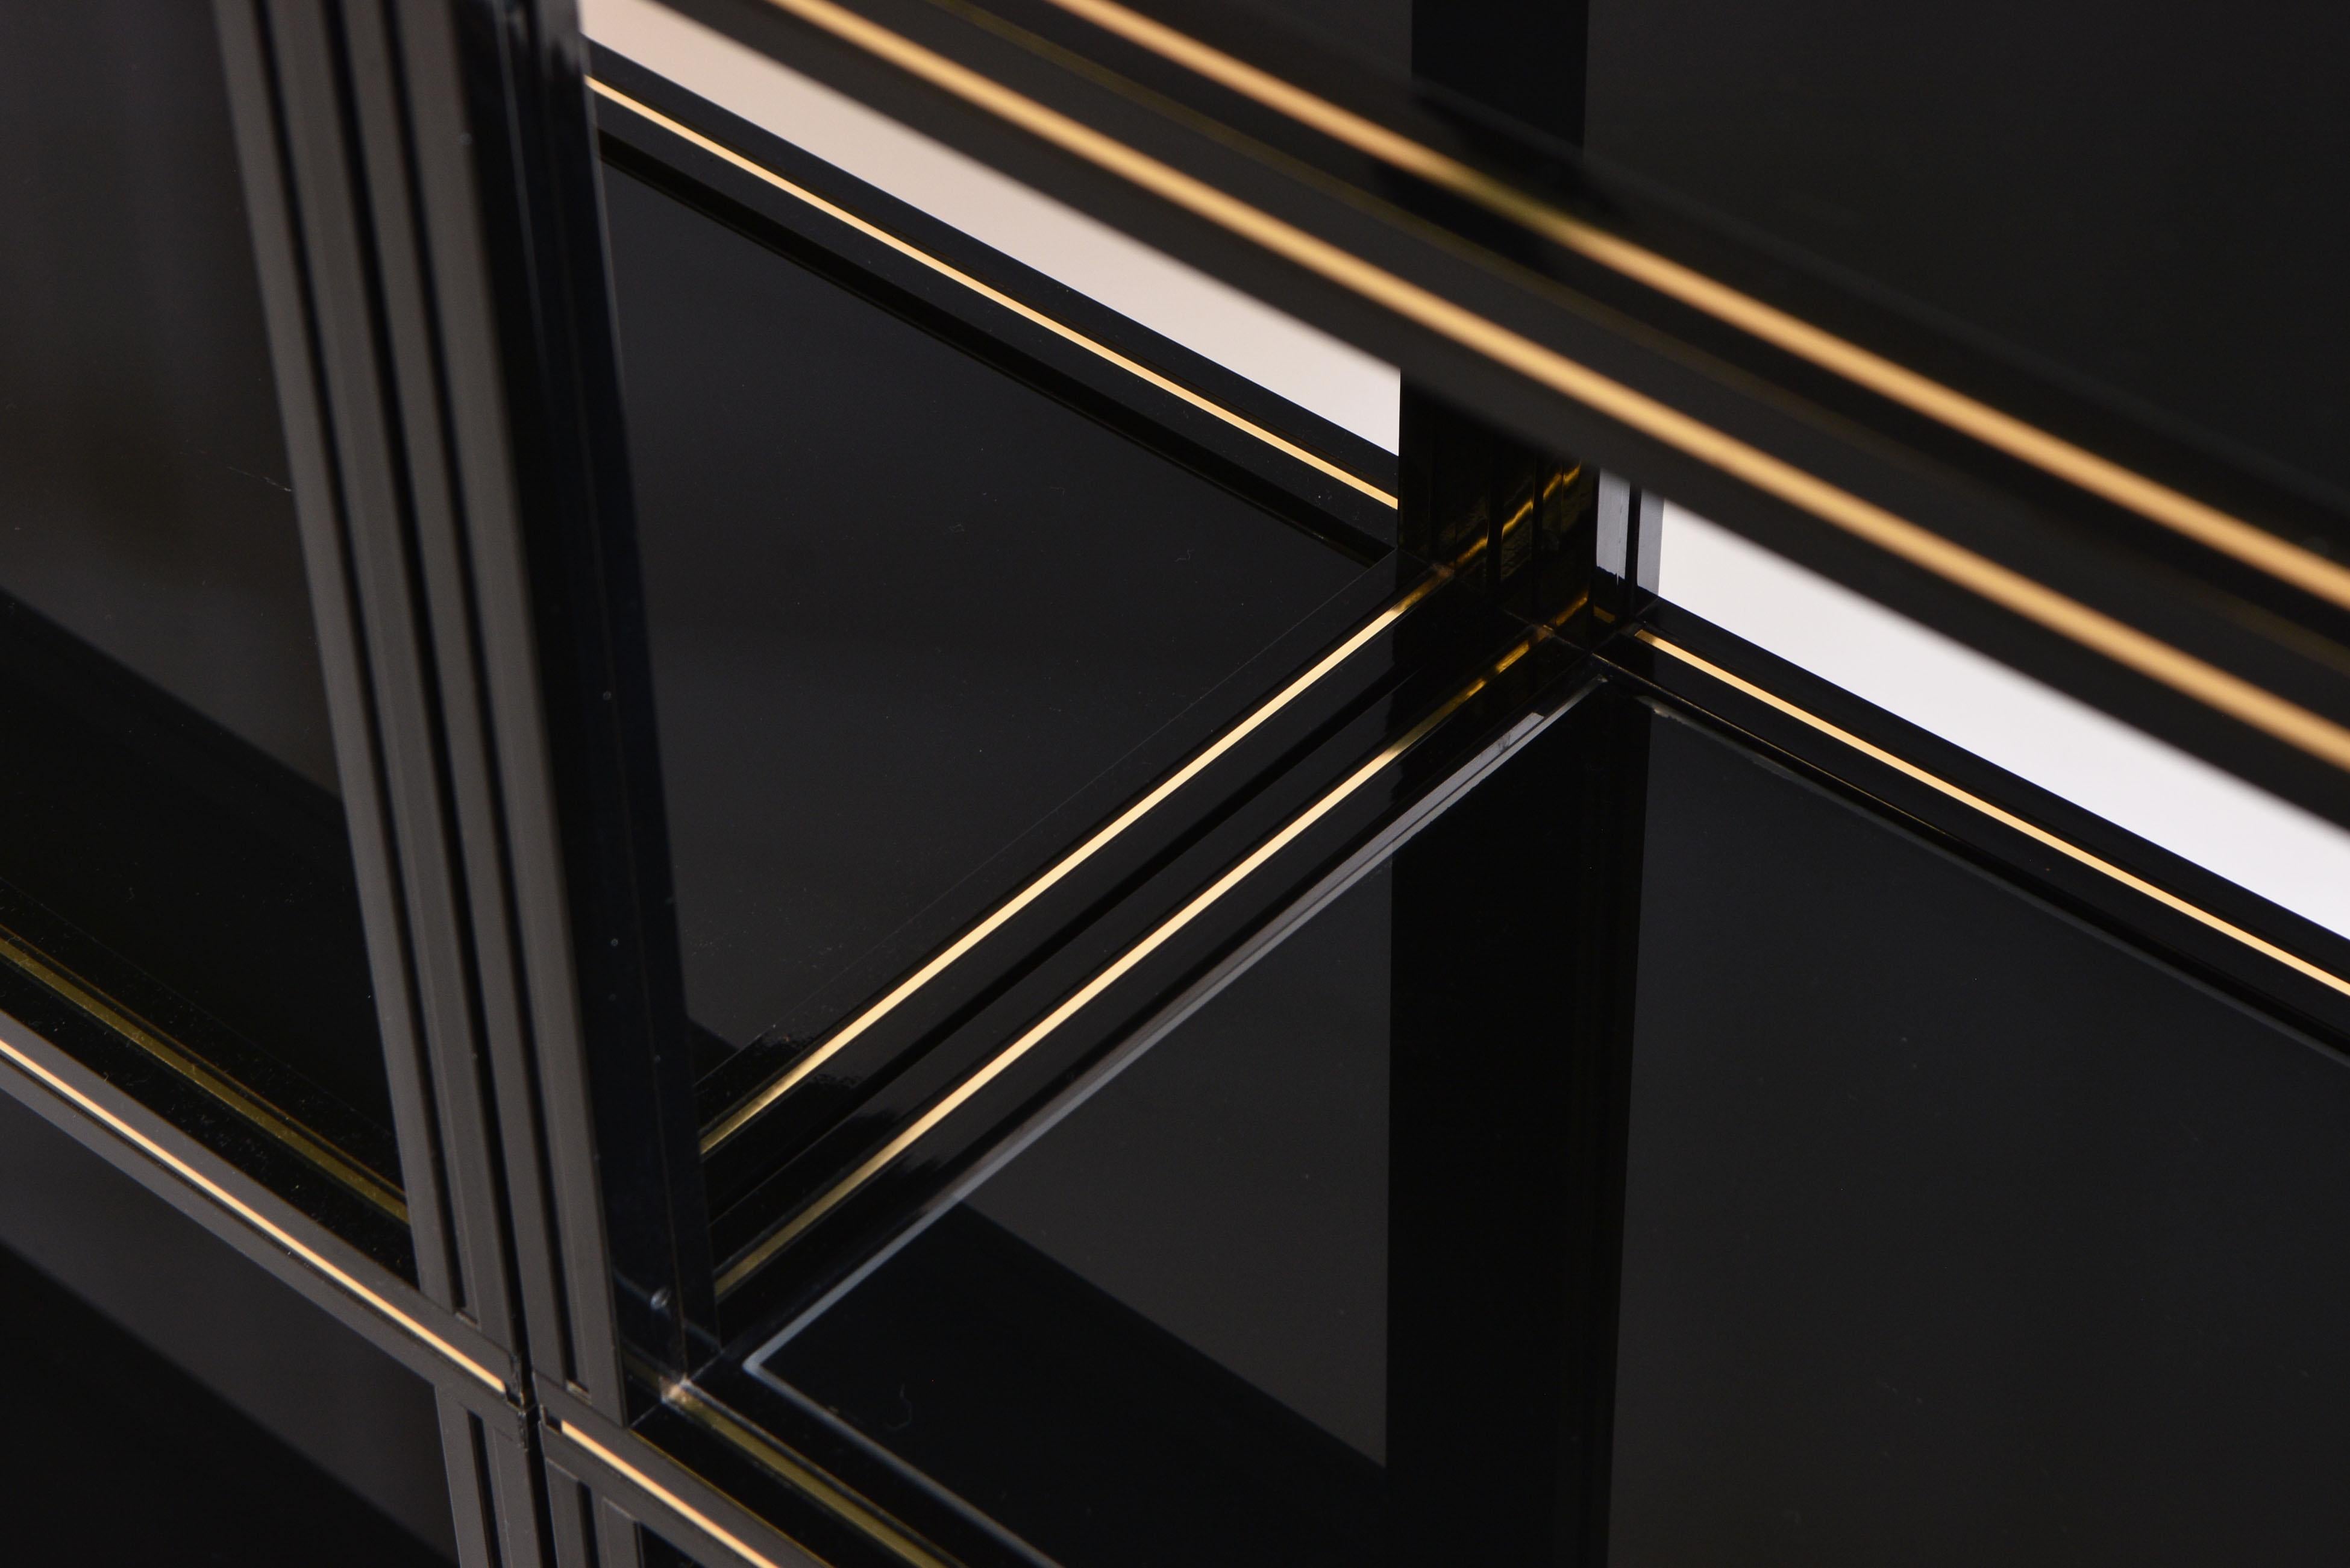 A Pierre Vandel two section black lacquered aluminium étagères with brass detailing and blacked glass shelves. Labelled - Pierre Vandel Paris - Circa late 1970s.

Furniture designer Pierre Vandel was born in 1946 in Roubaix, on the outskirts of